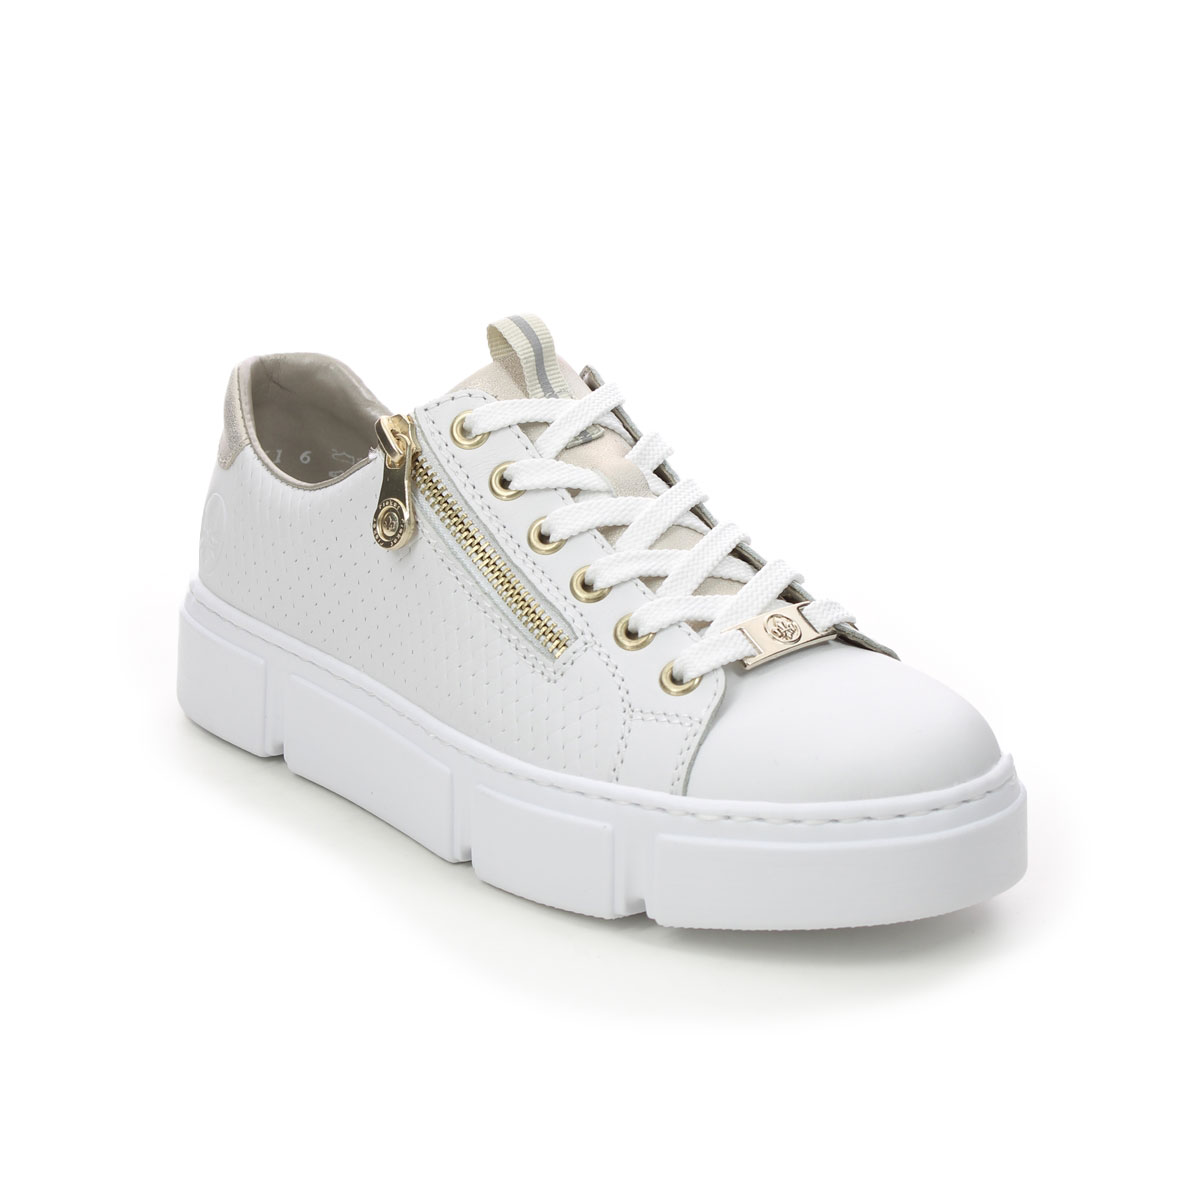 Rieker Hagen White Leather Womens Trainers N5932-80 In Size 40 In Plain White Leather